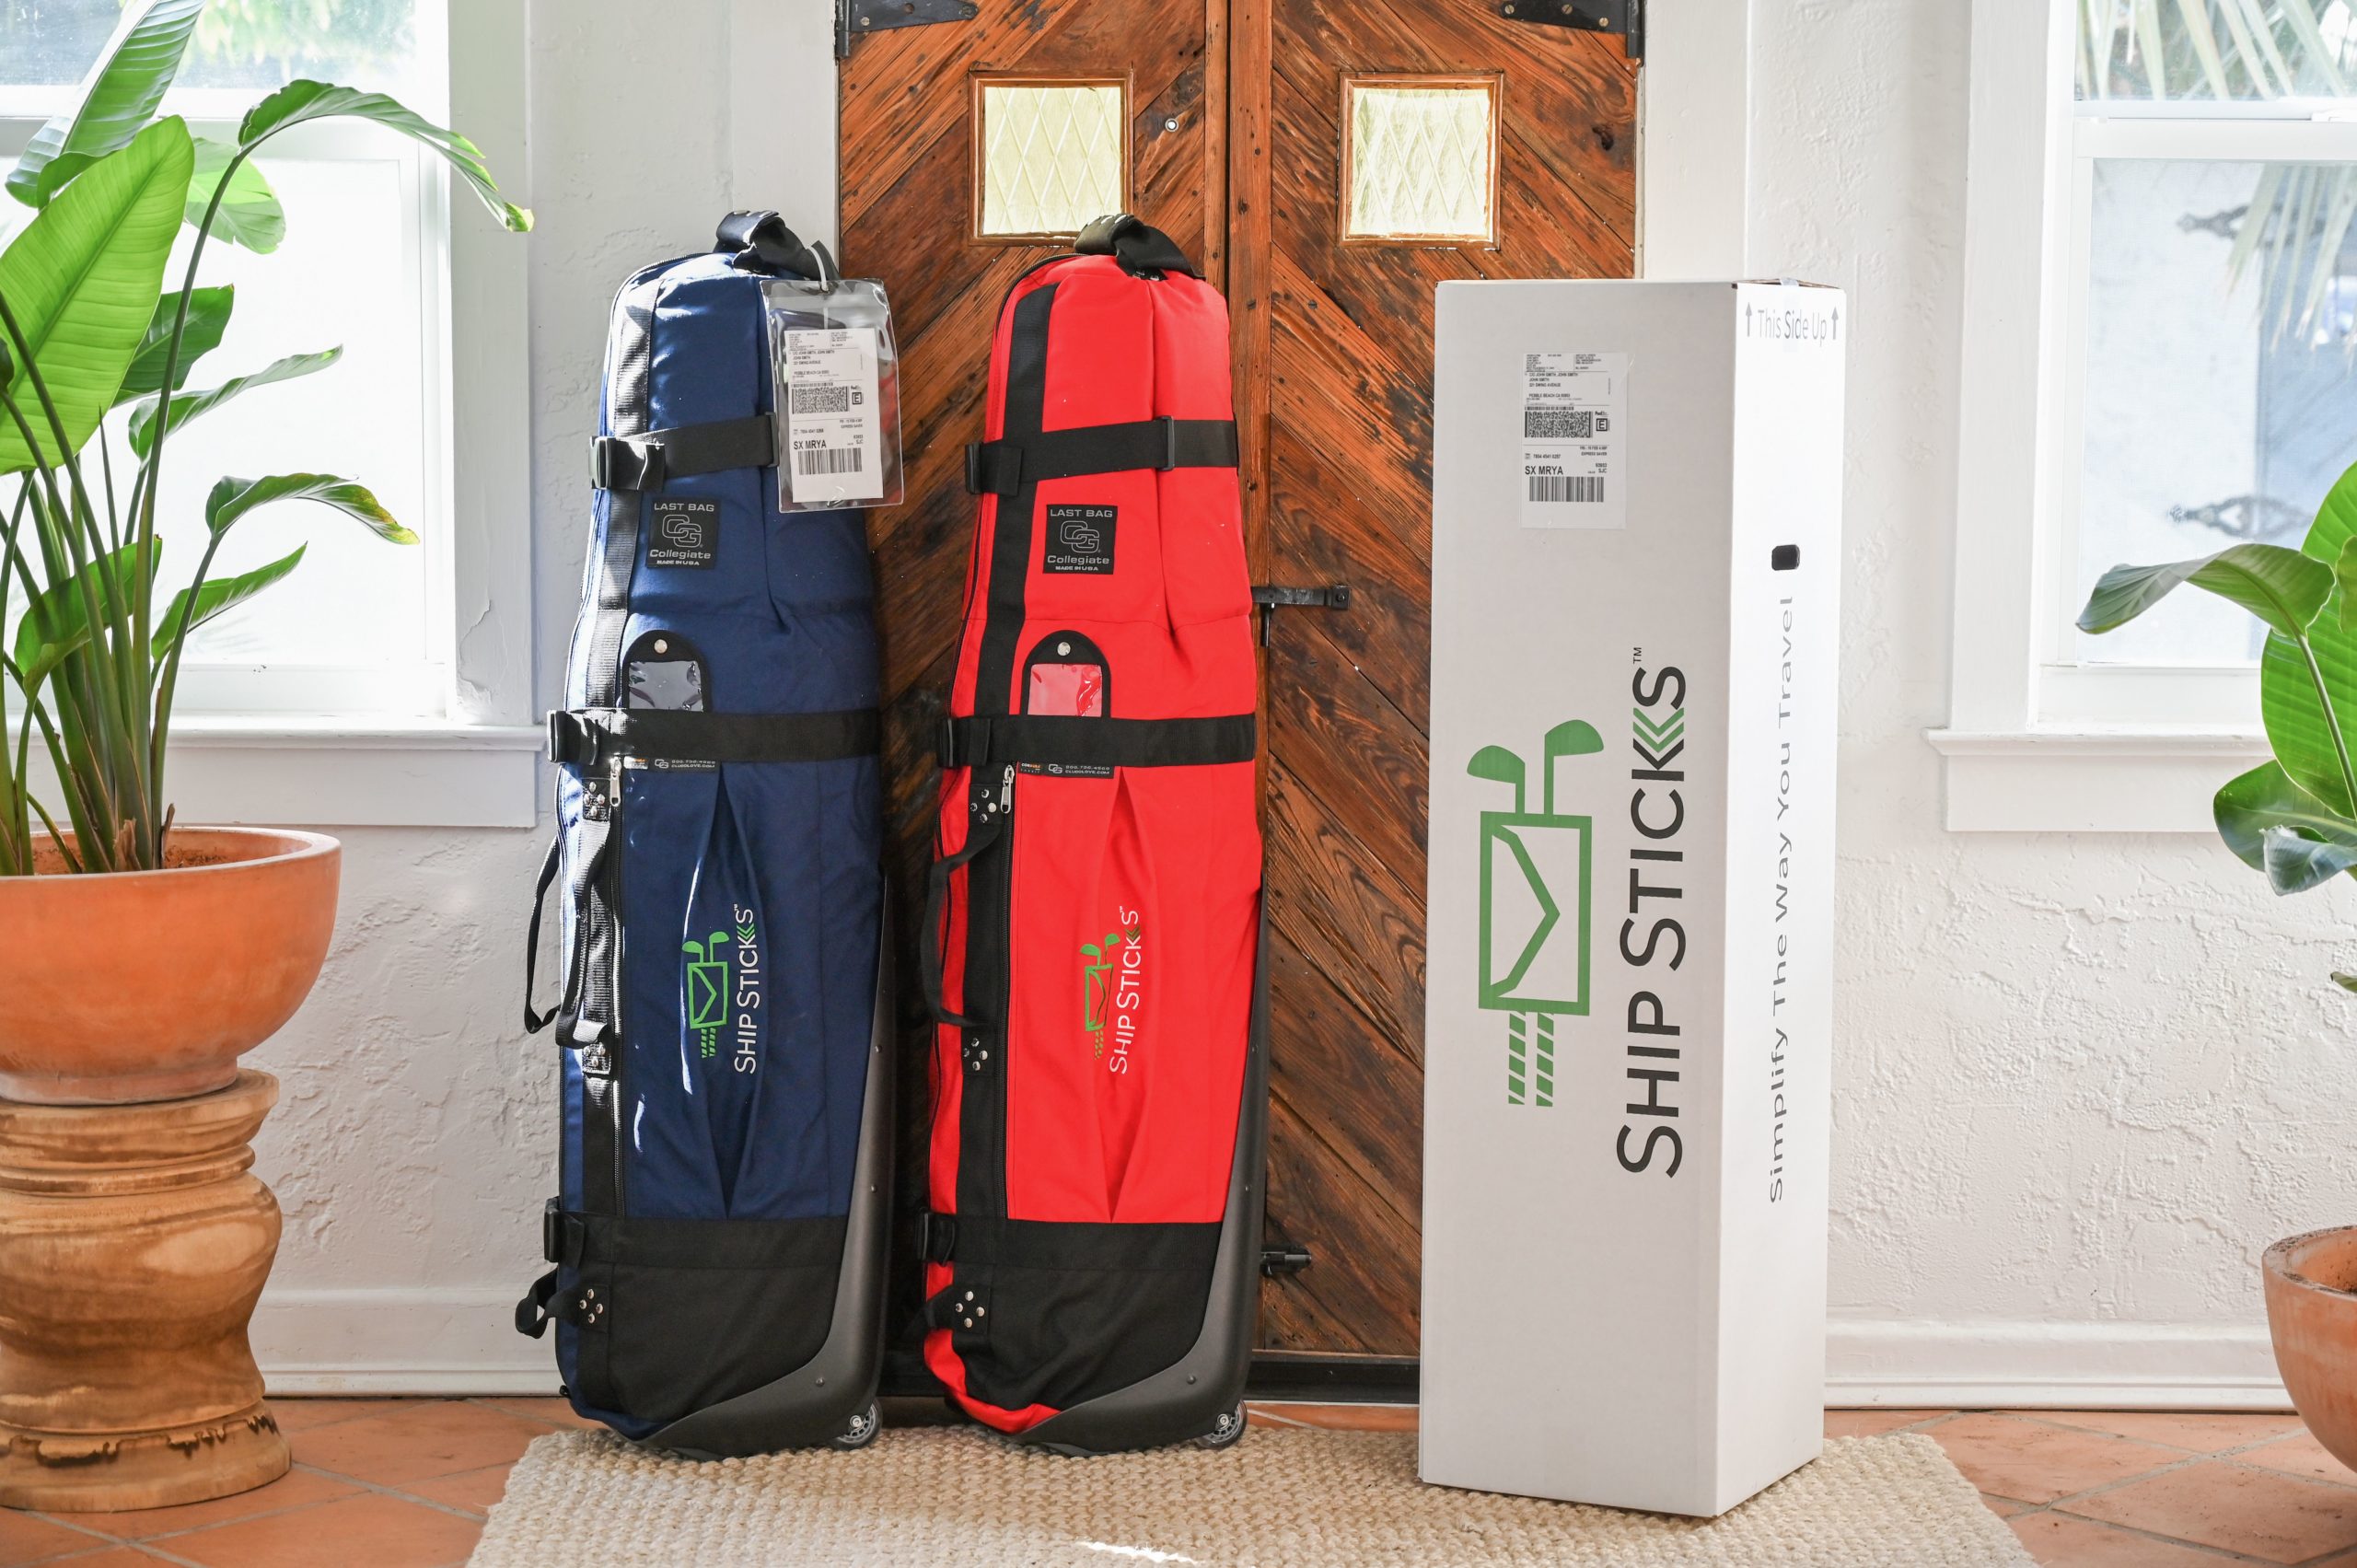 Two golf bags in travel bags and a Ship Sticks box... the company that provides the shipping.